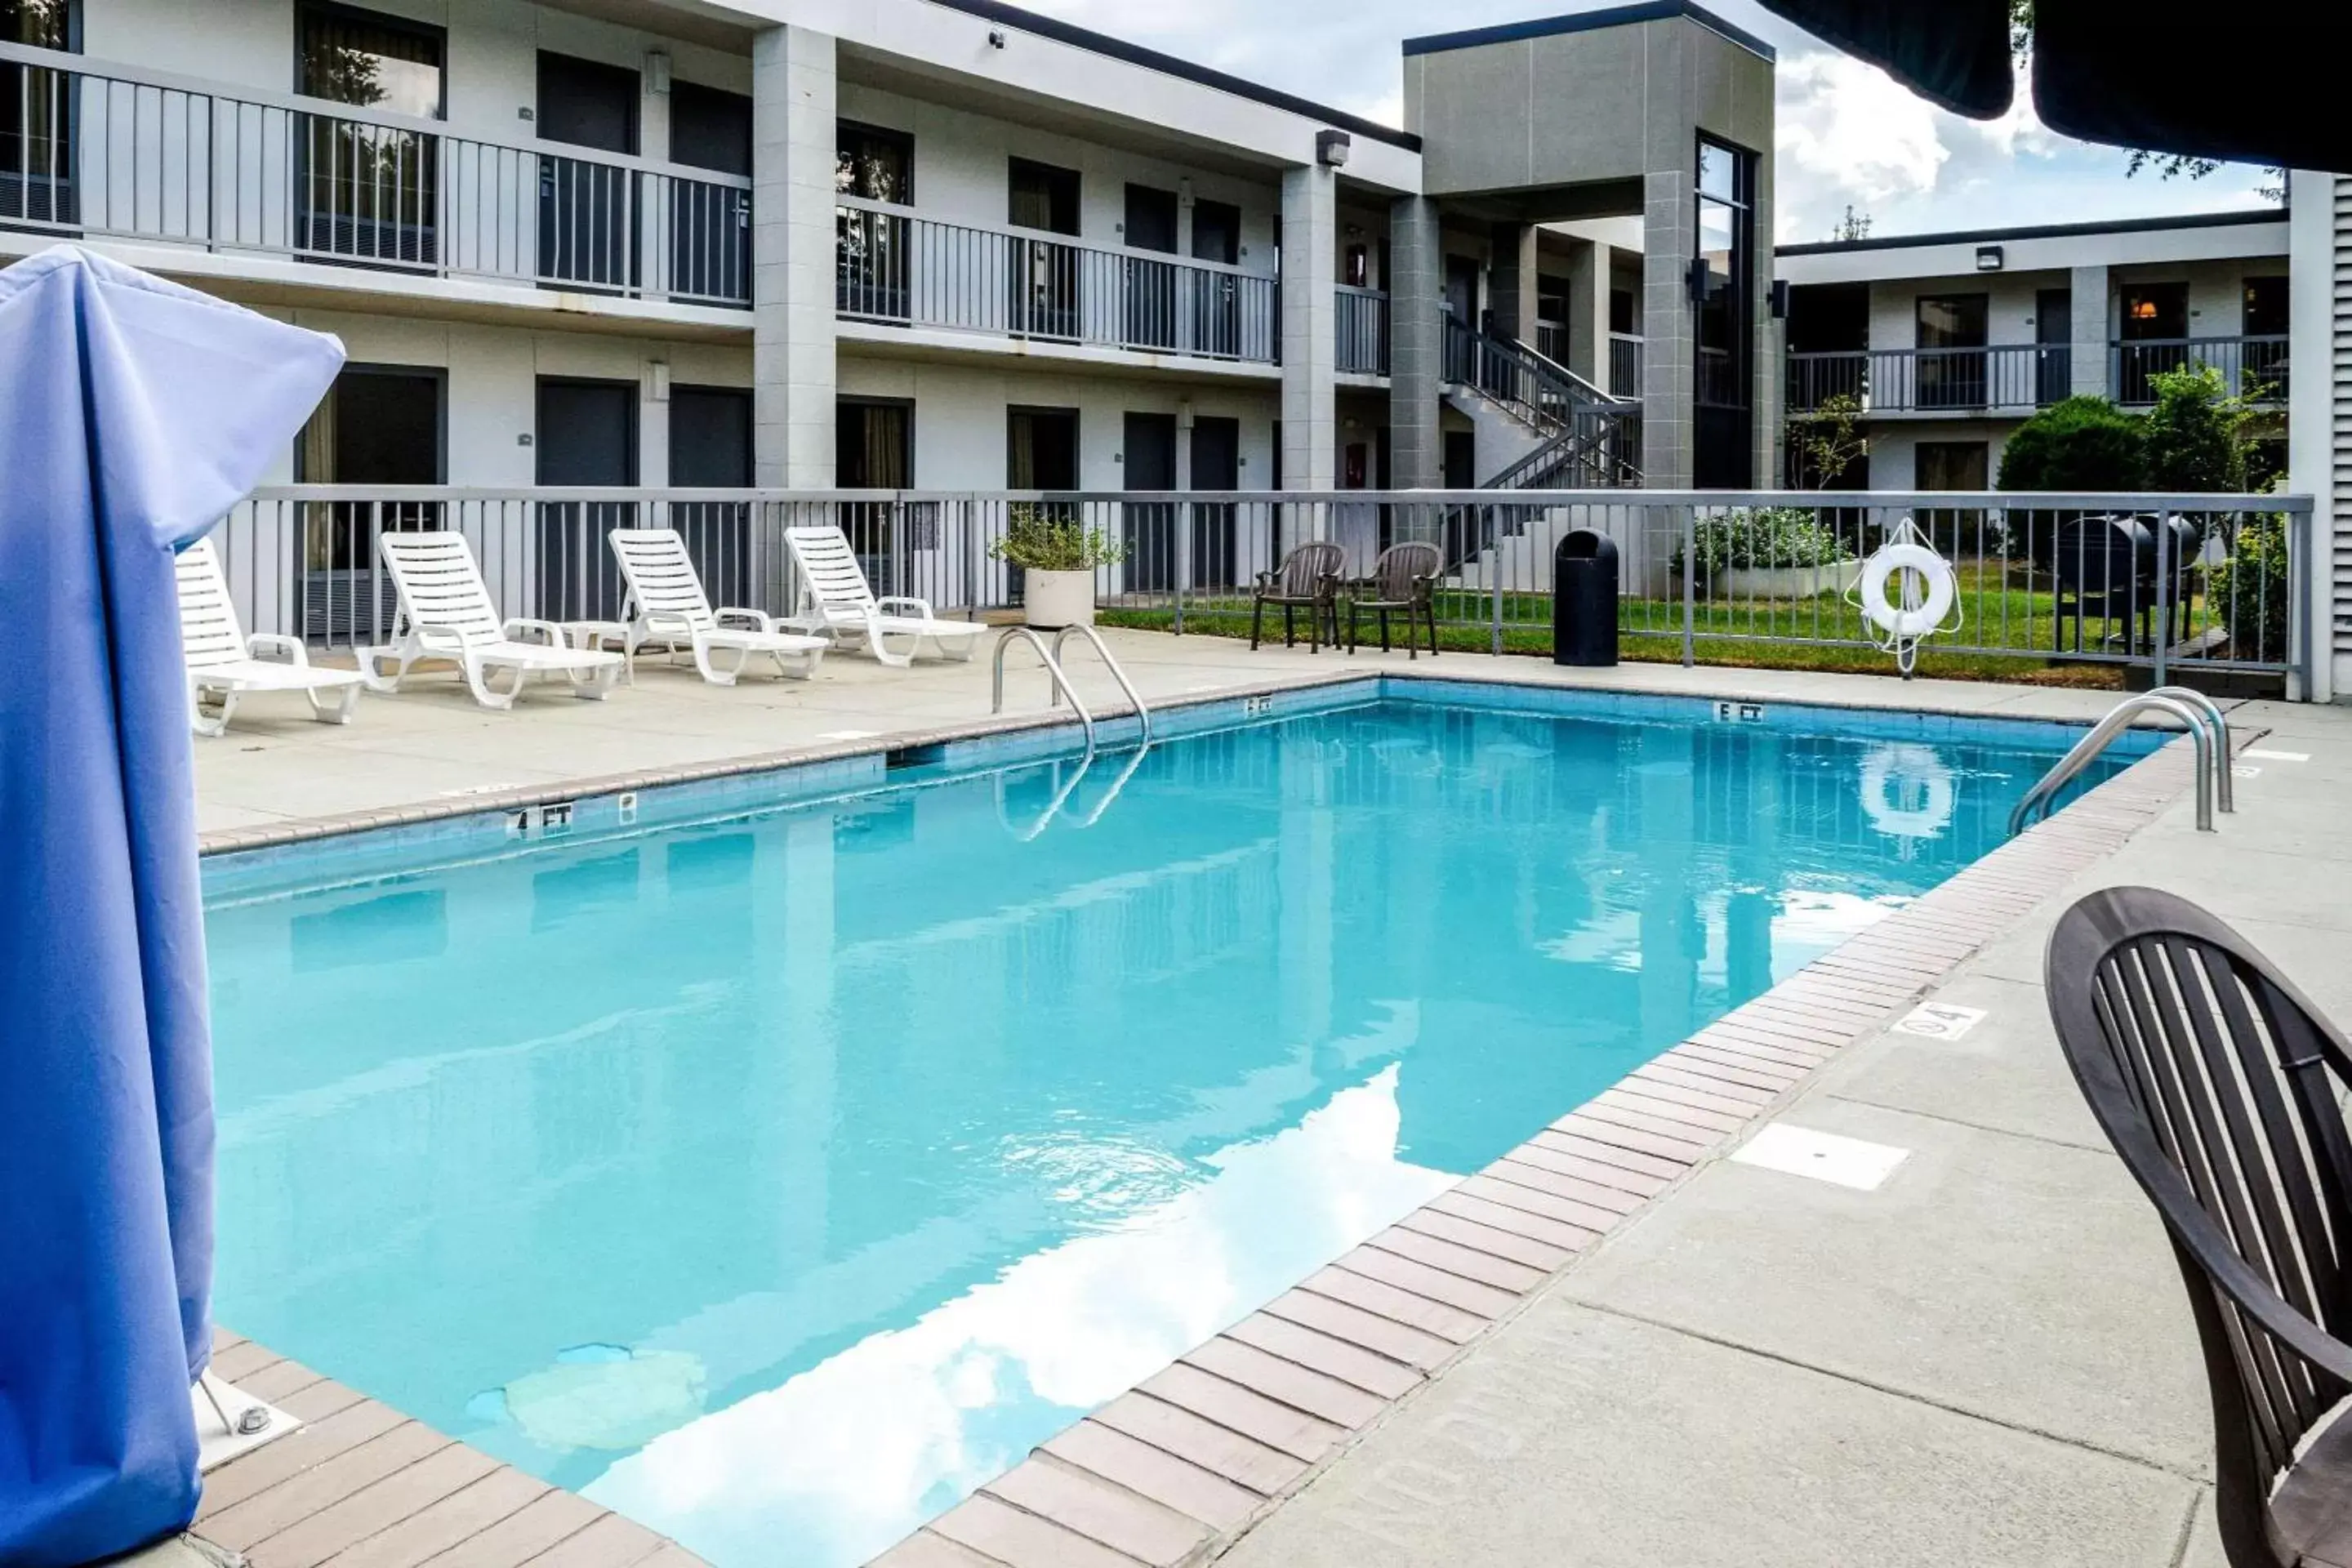 On site, Swimming Pool in Quality Inn Moss Point